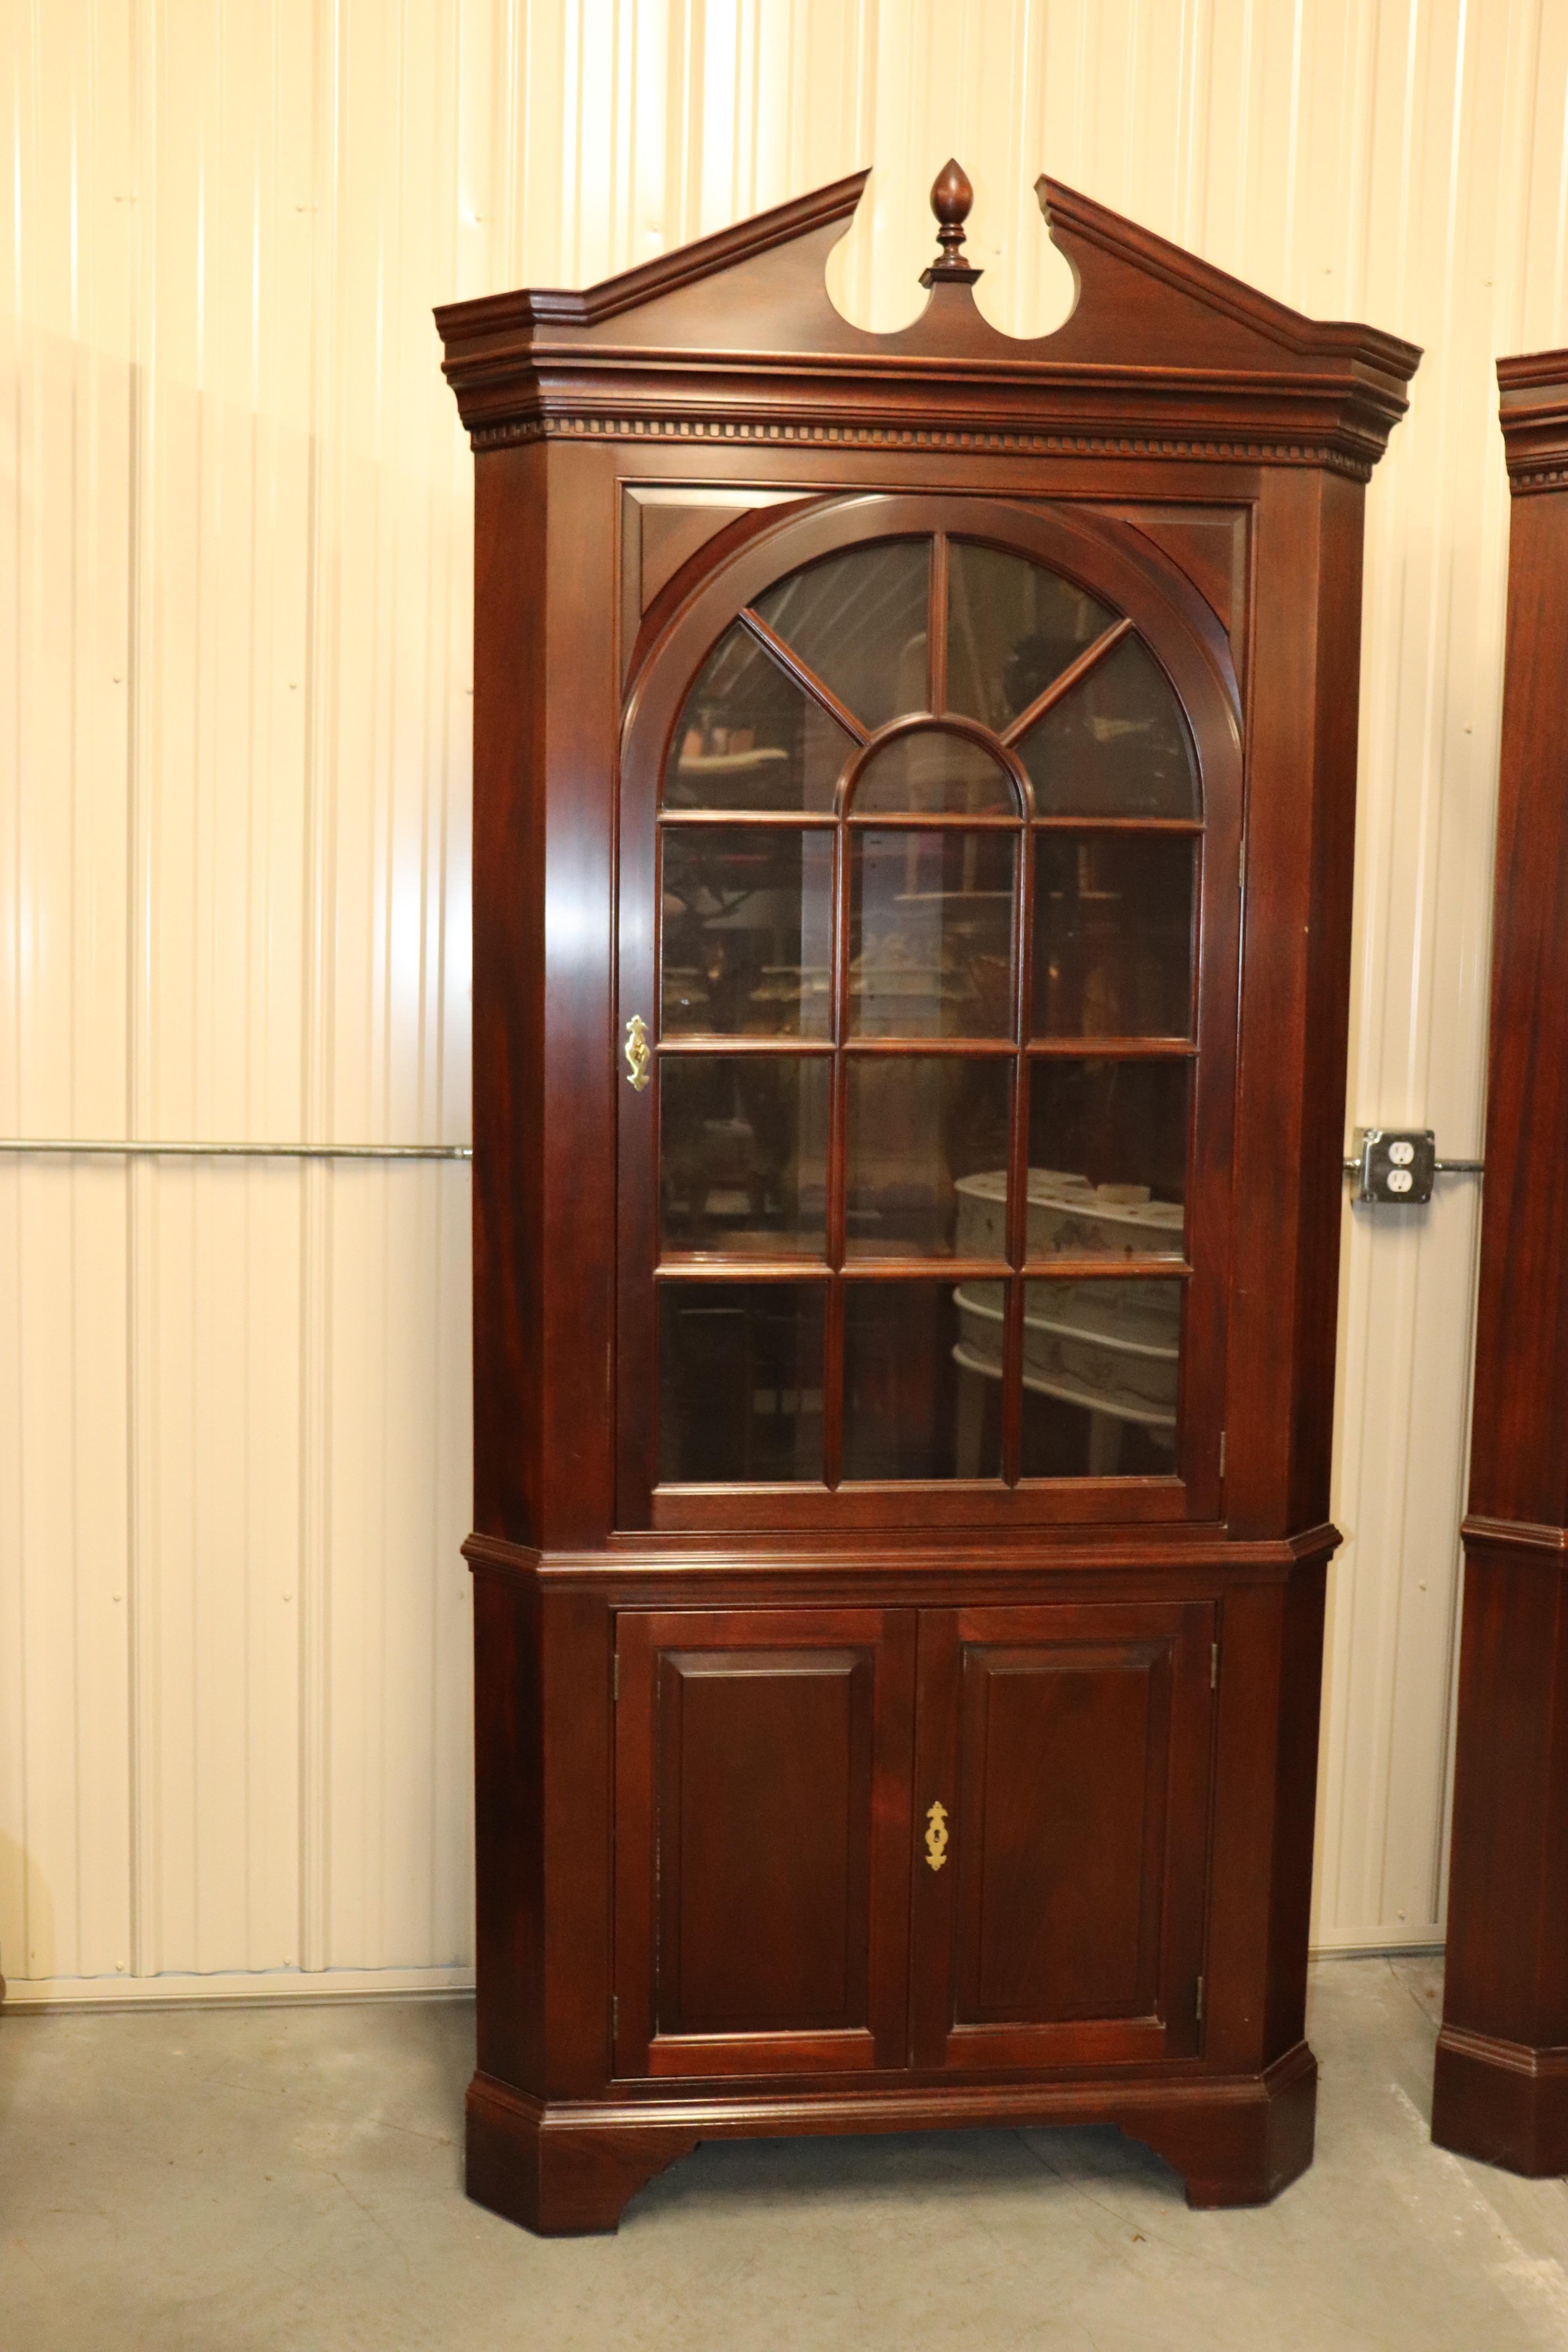 This is a very clean pair of solid mahogany corner cabinets by Stickley furniture. They feature incredible wood quality and are in superb condition. The glass is all individal and these are perfect for your client's home where they need a high